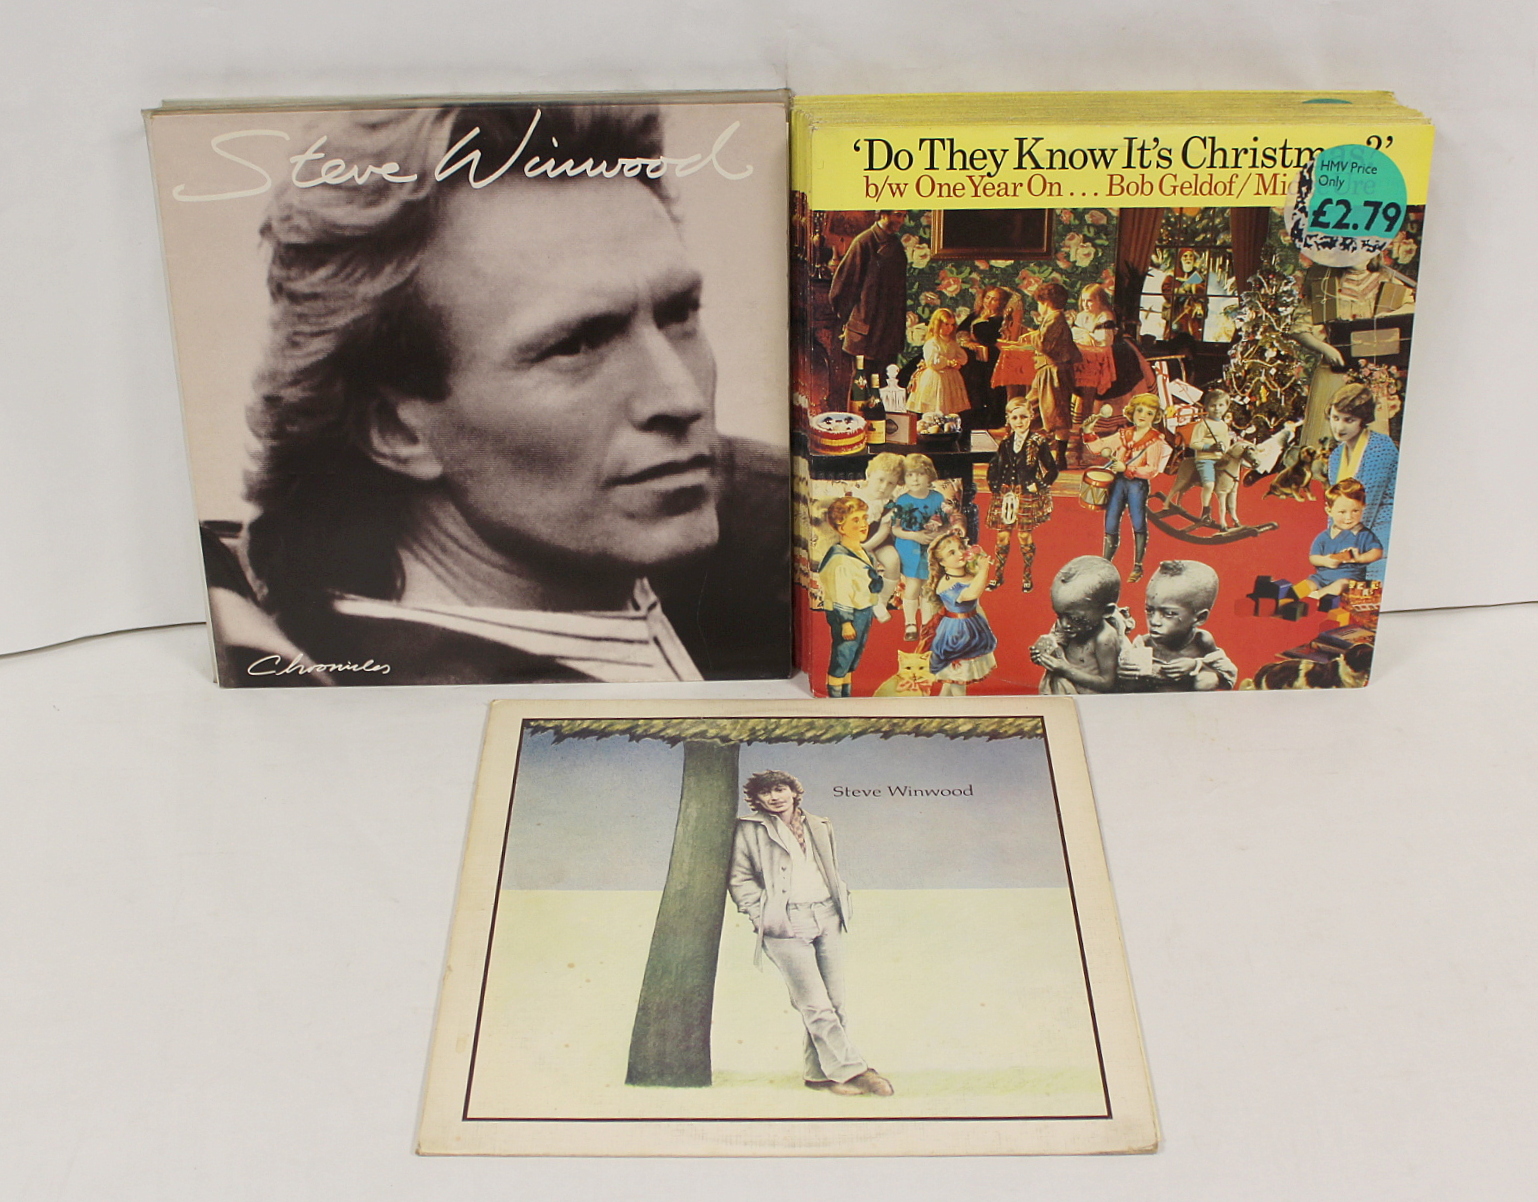 20 x Band Aid 'Do They Know It's Christmas' 12" also 5 x Steve Winwood 'Arc Of A Diver' LPs.